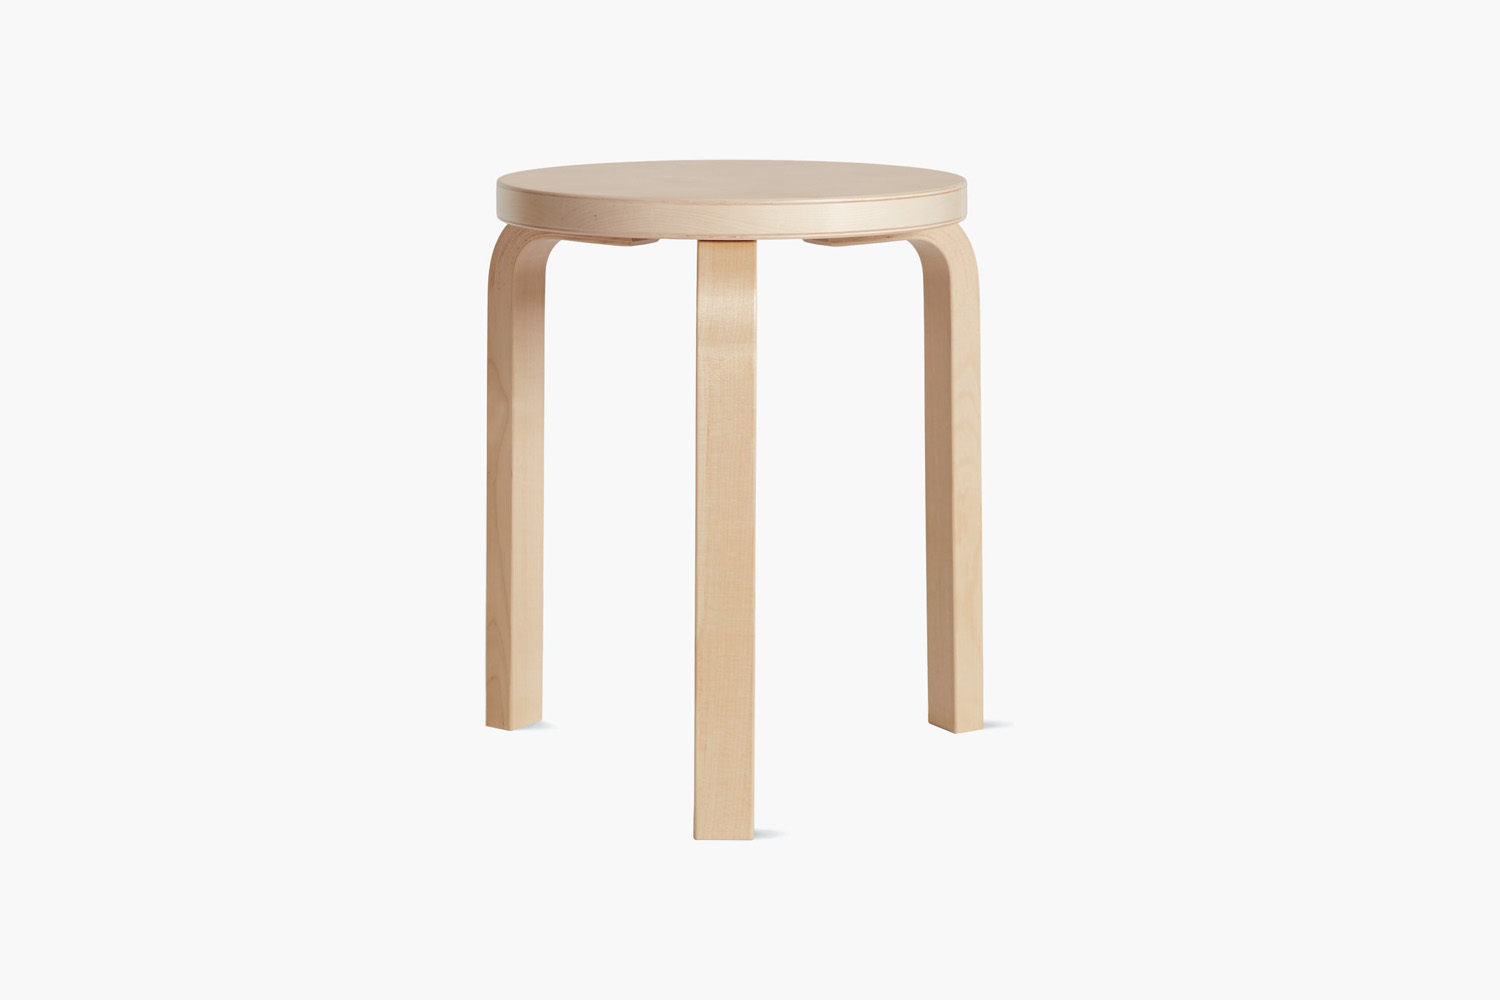 the classic aalto stool 60 birch, designed by alvar aalto and first presented i 14